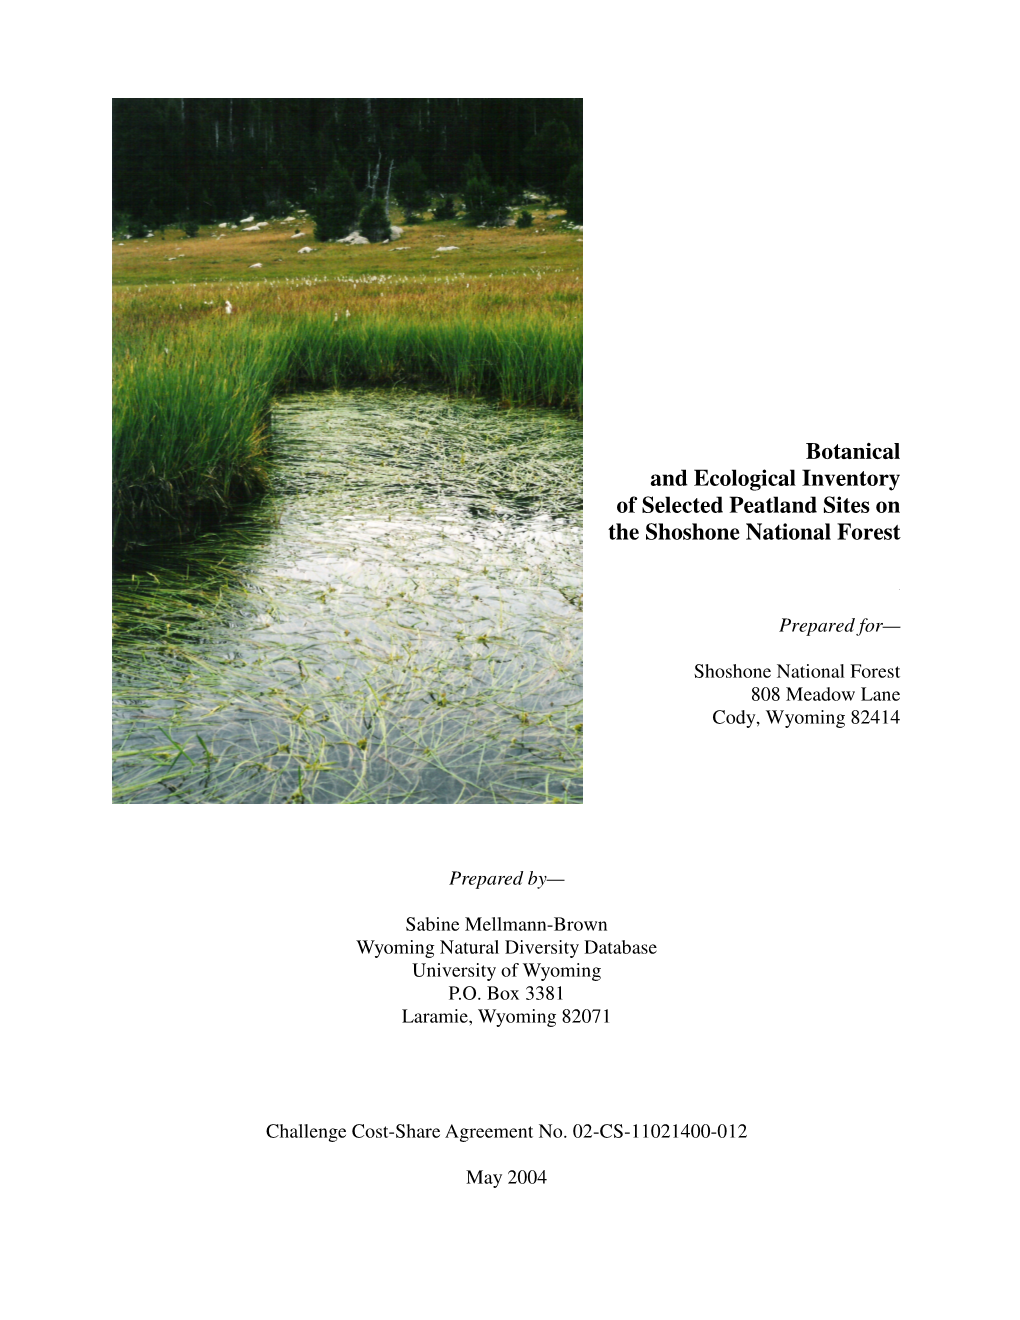 Botanical and Ecological Inventory of Selected Peatland Sites on the Shoshone National Forest